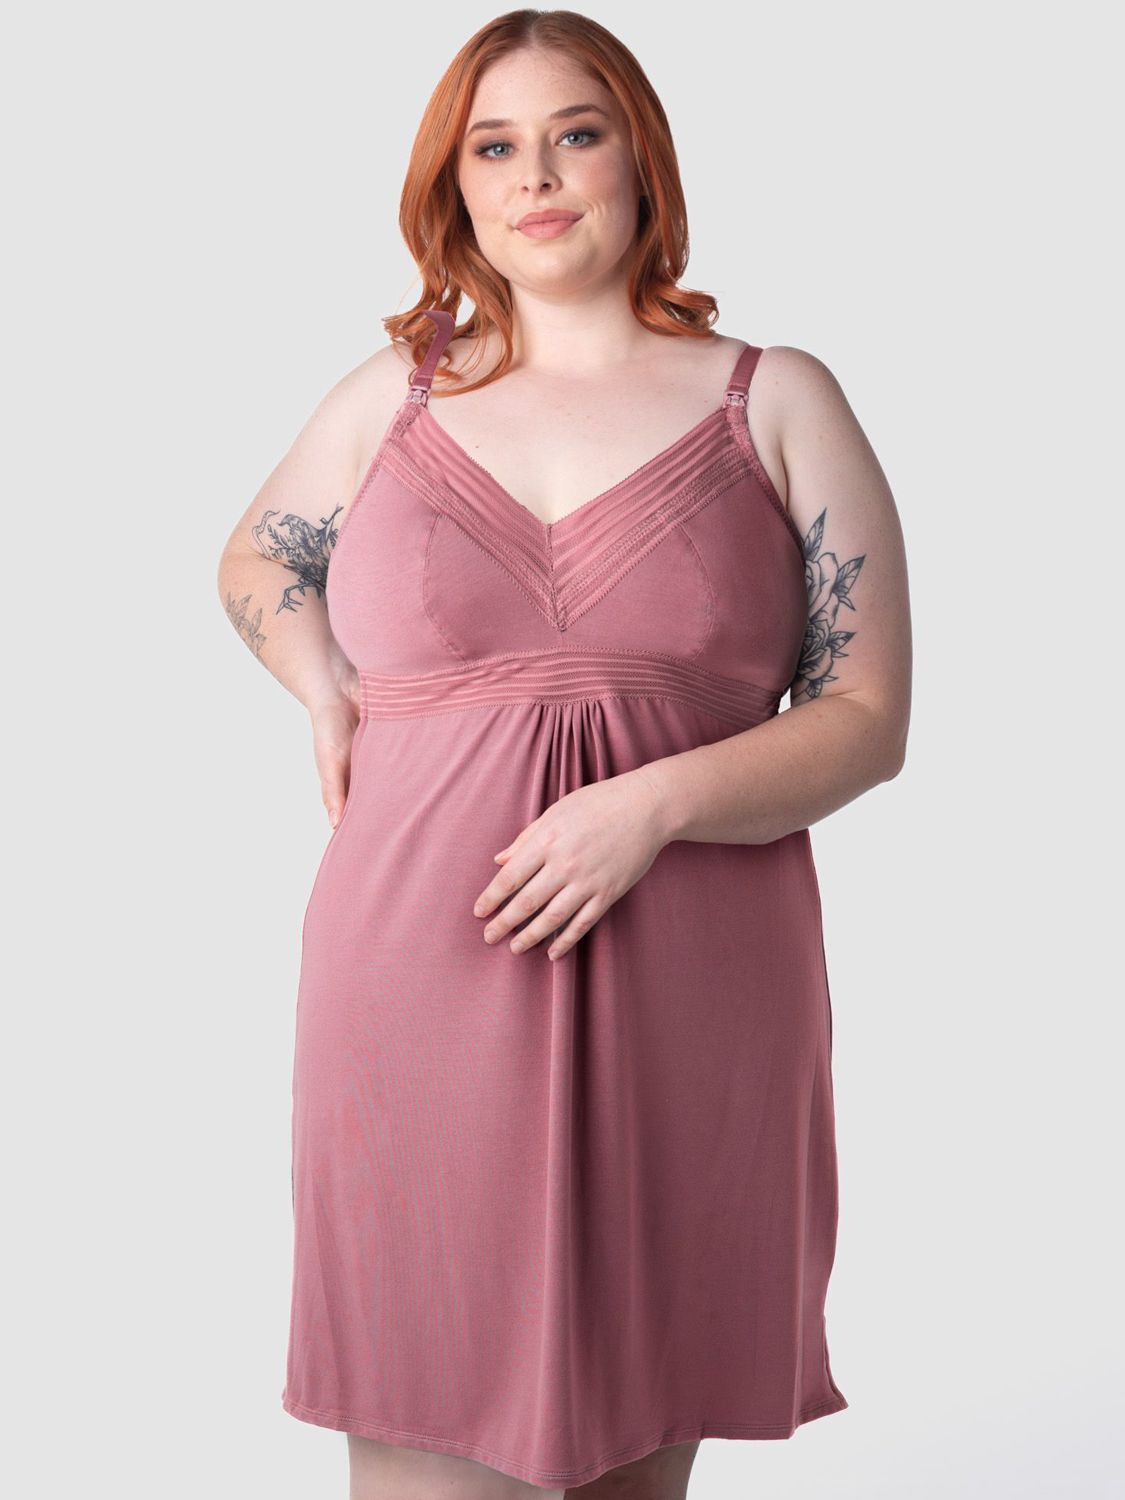 Buy Hotmilk Dream Lace Trim Full Cup Nightdress Online at johnlewis.com